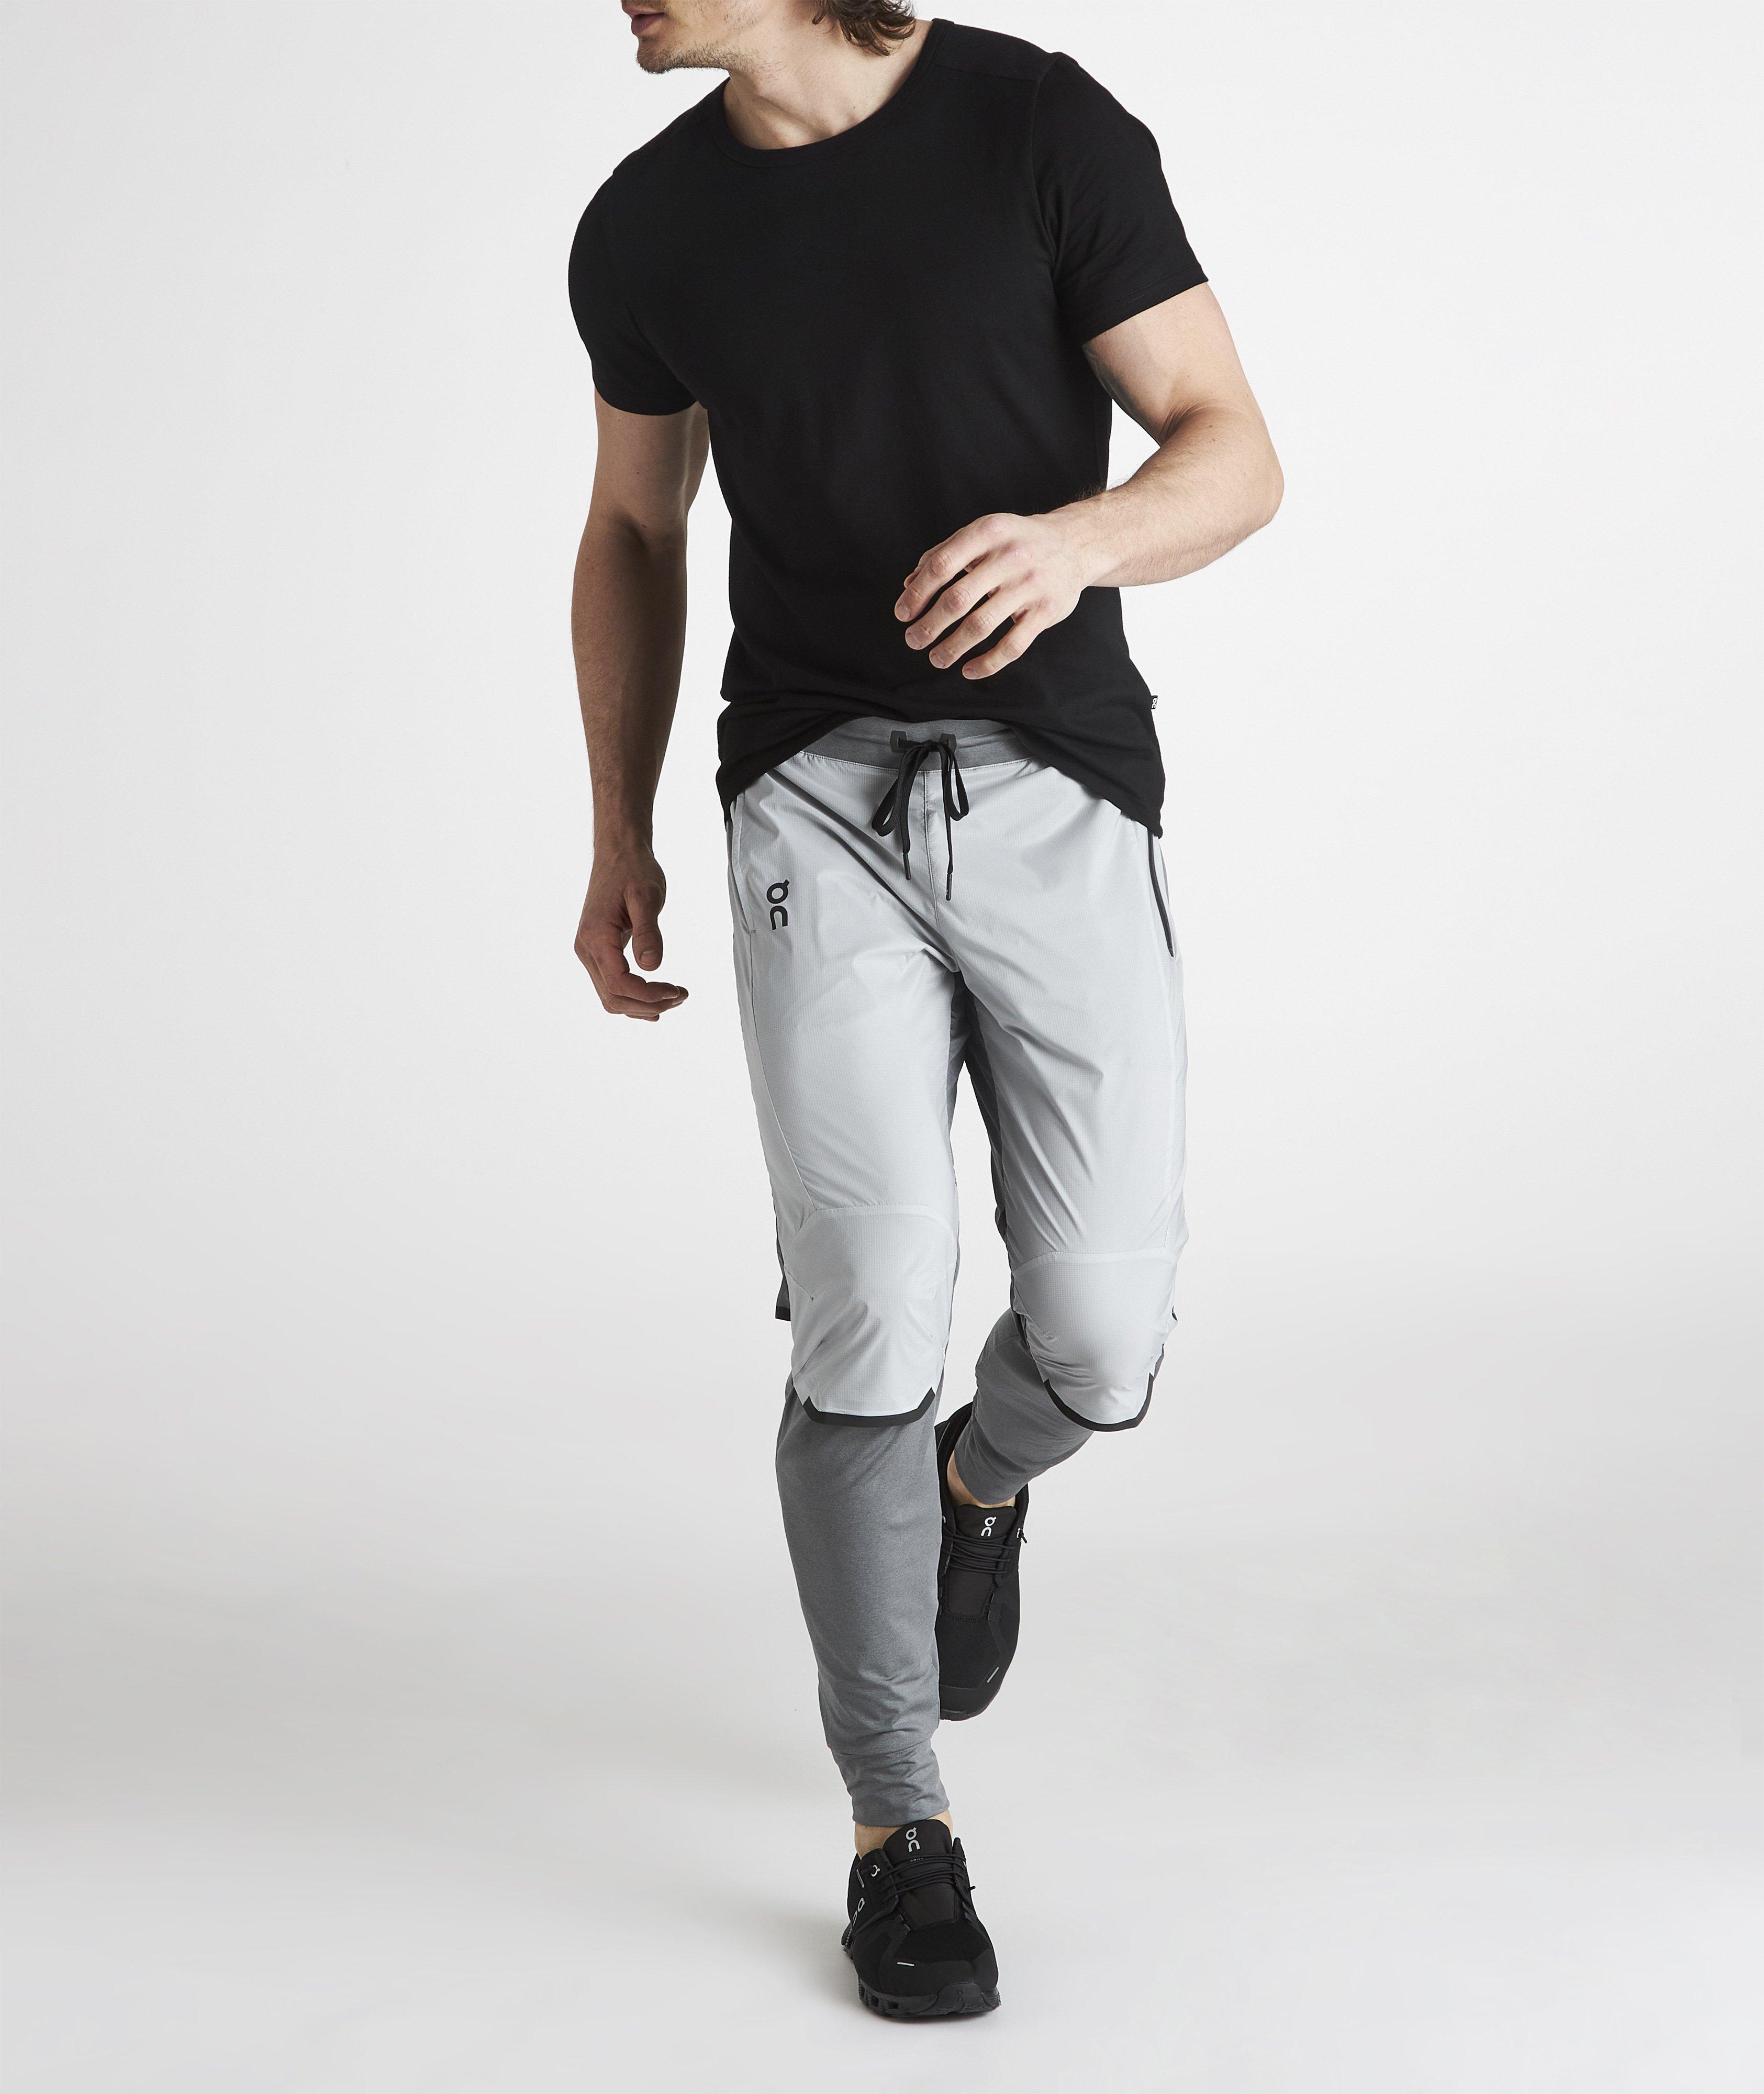 High Performance Technical Running Pants image 6